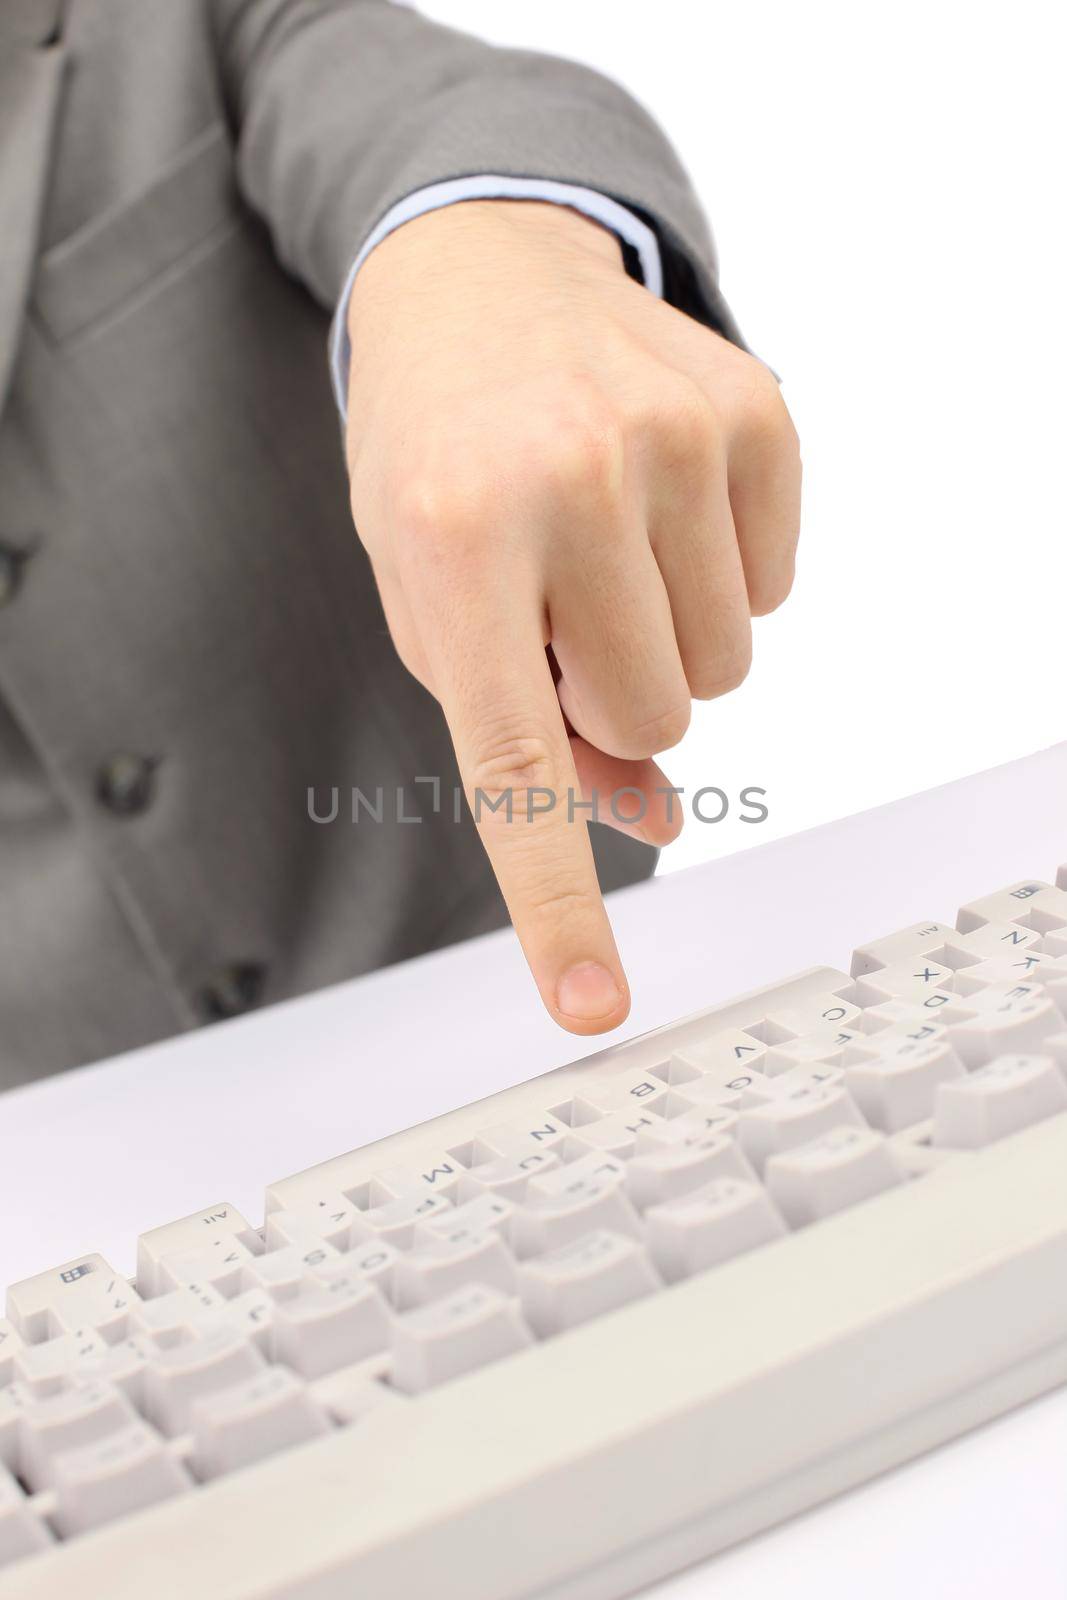 hands typing on keyboard